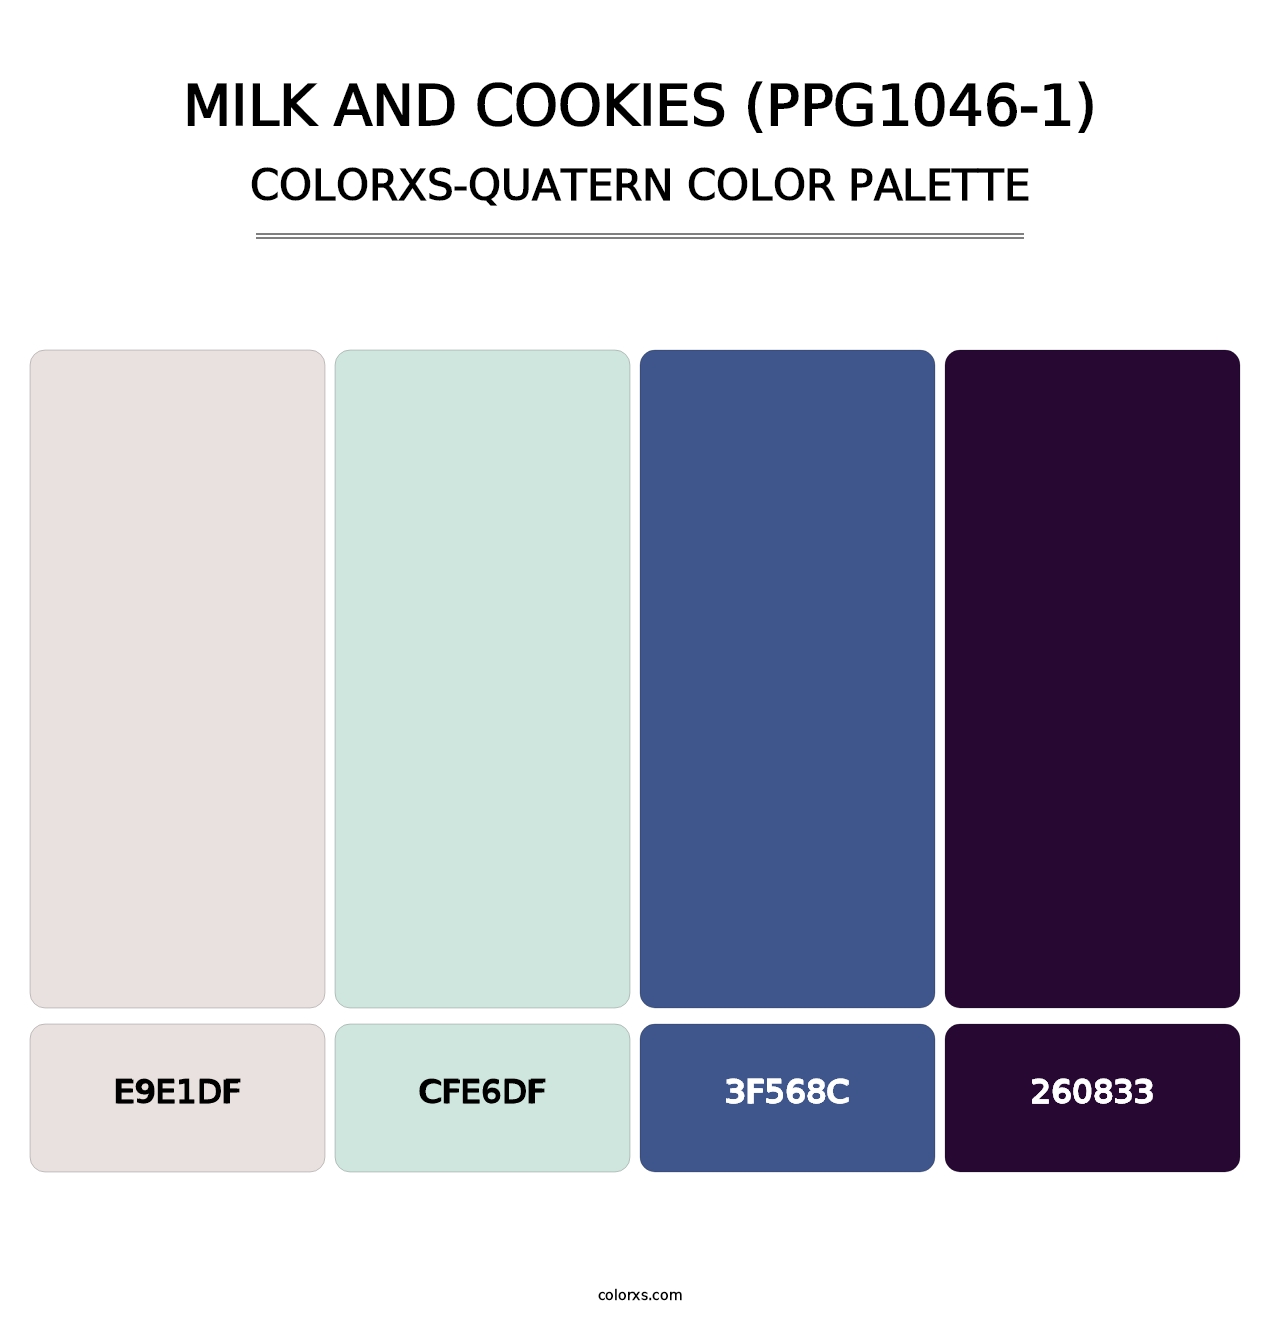 Milk And Cookies (PPG1046-1) - Colorxs Quatern Palette